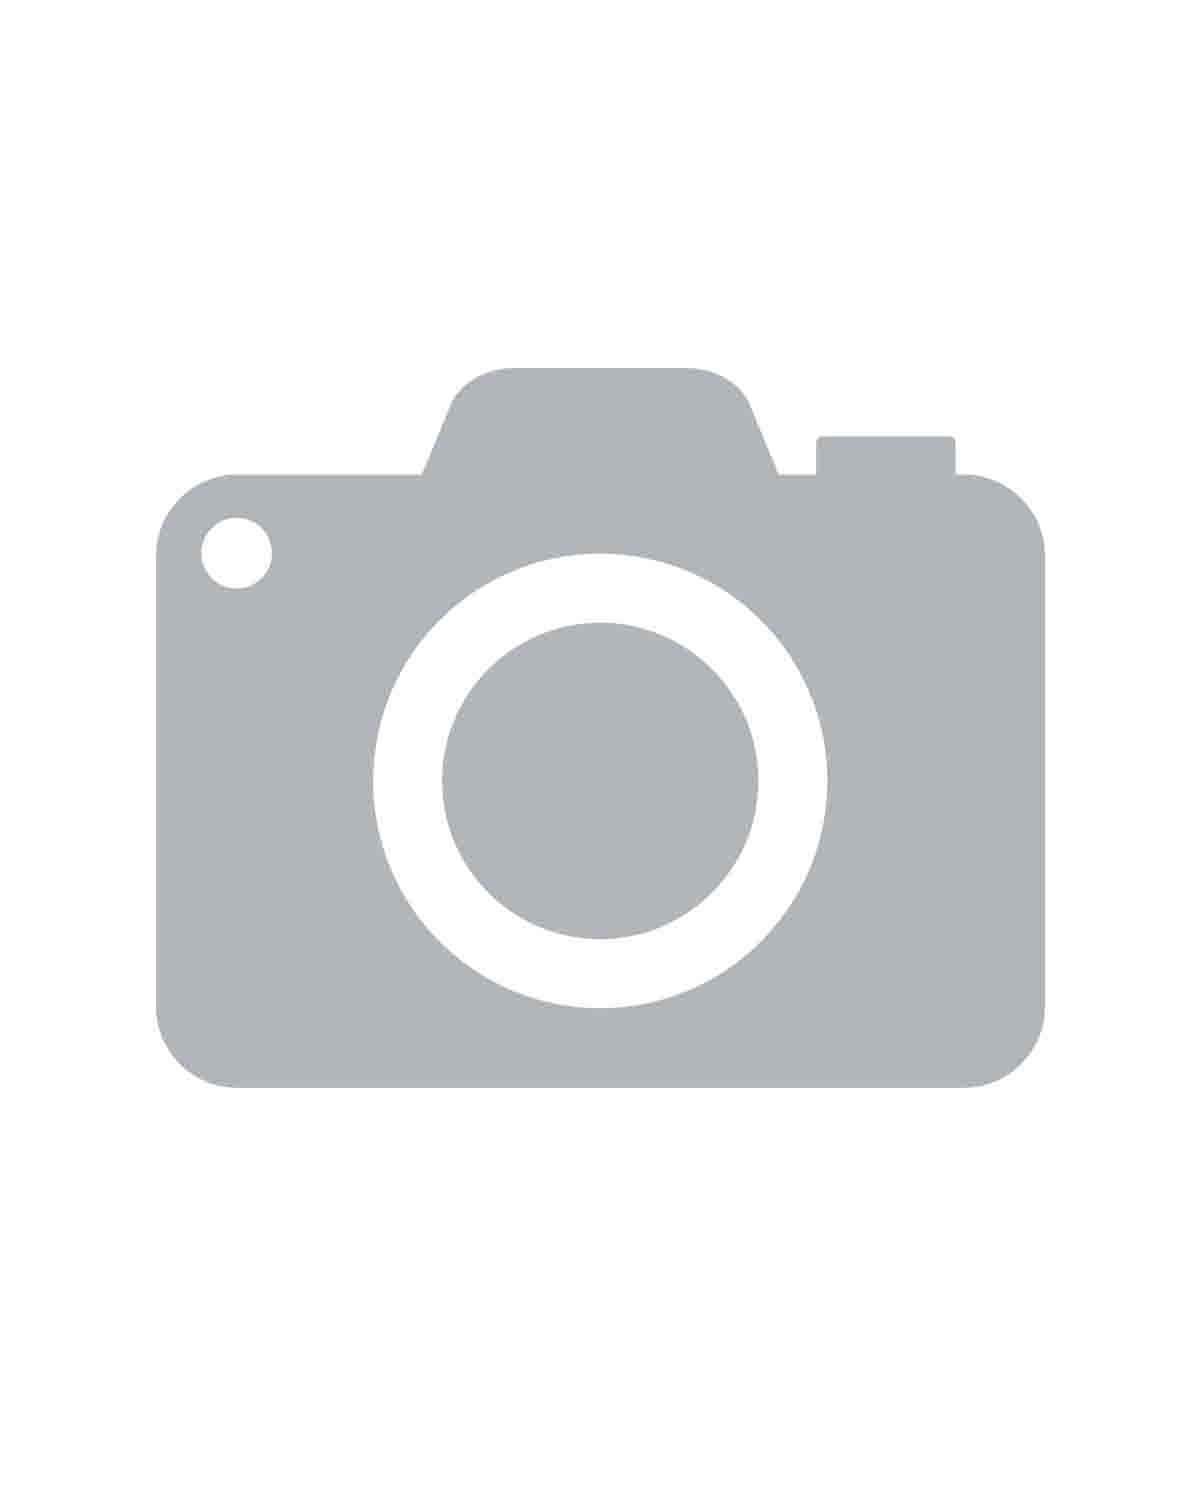 Placeholder icon for photo